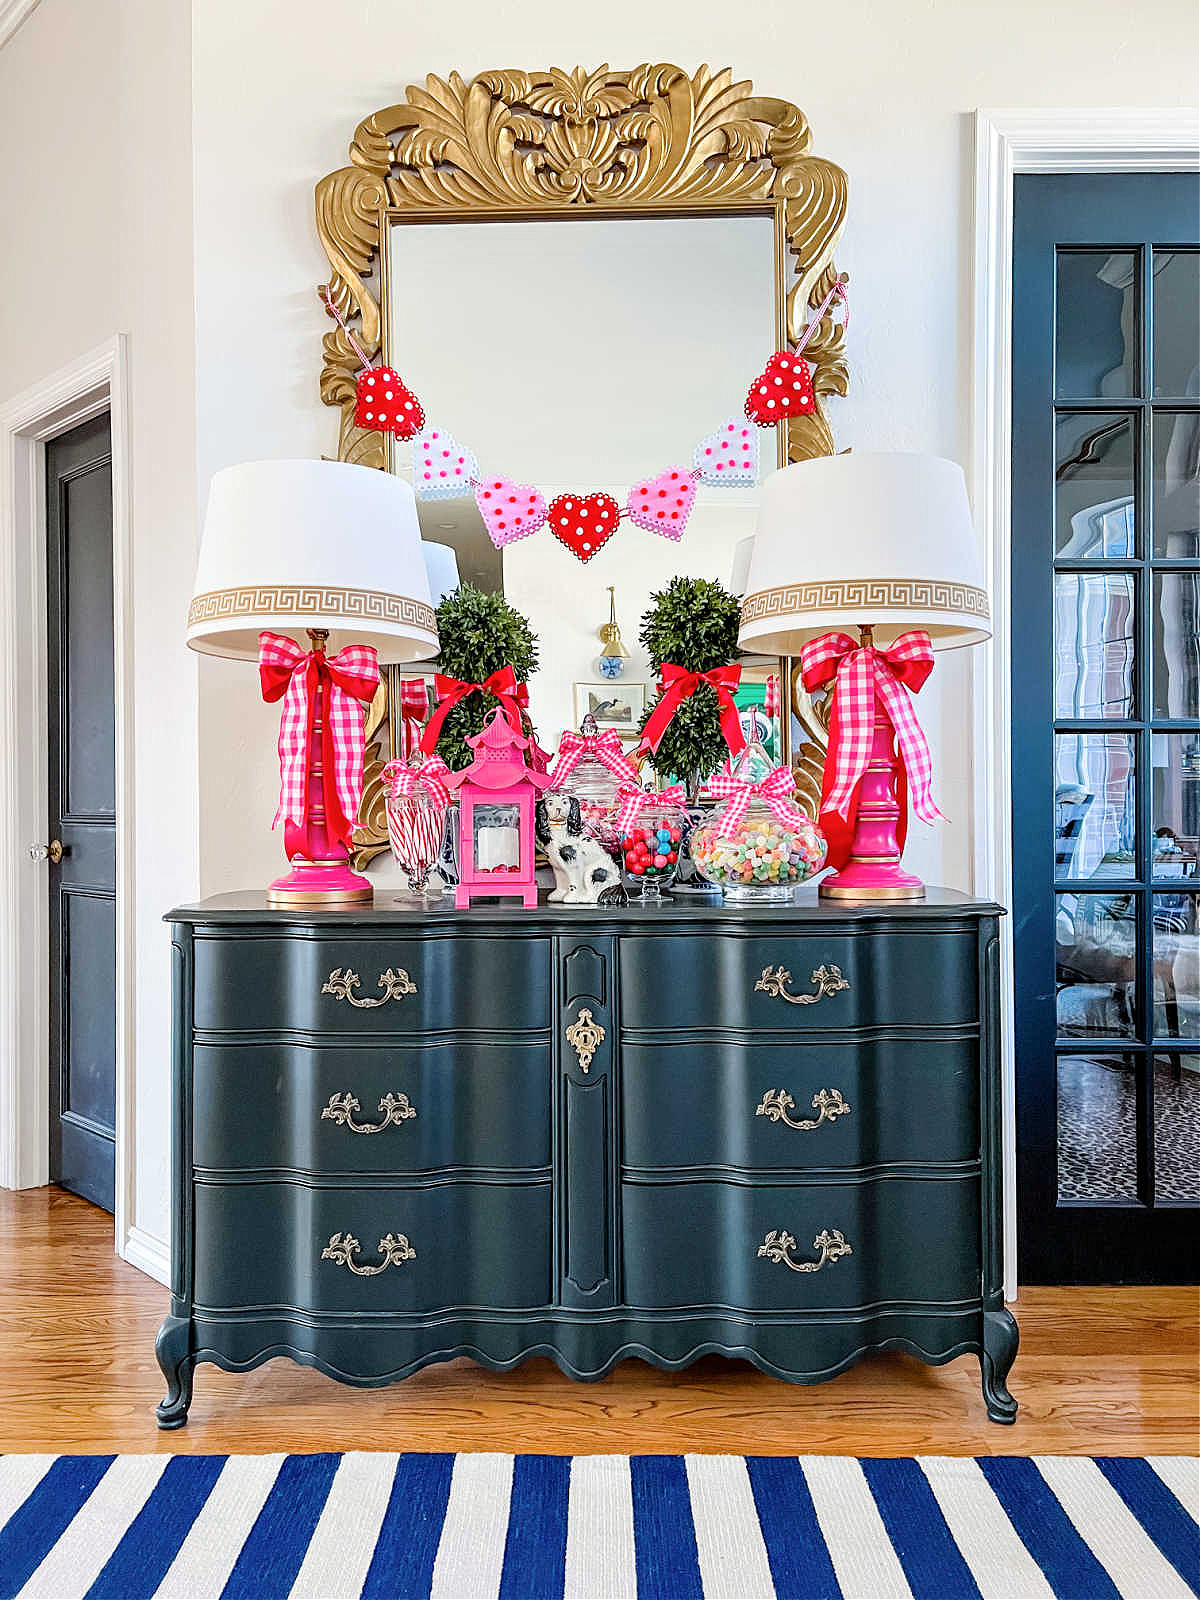 Entry Valentine's Day decorations- black dresser with candy in apothecary jars and heart garland over mirror